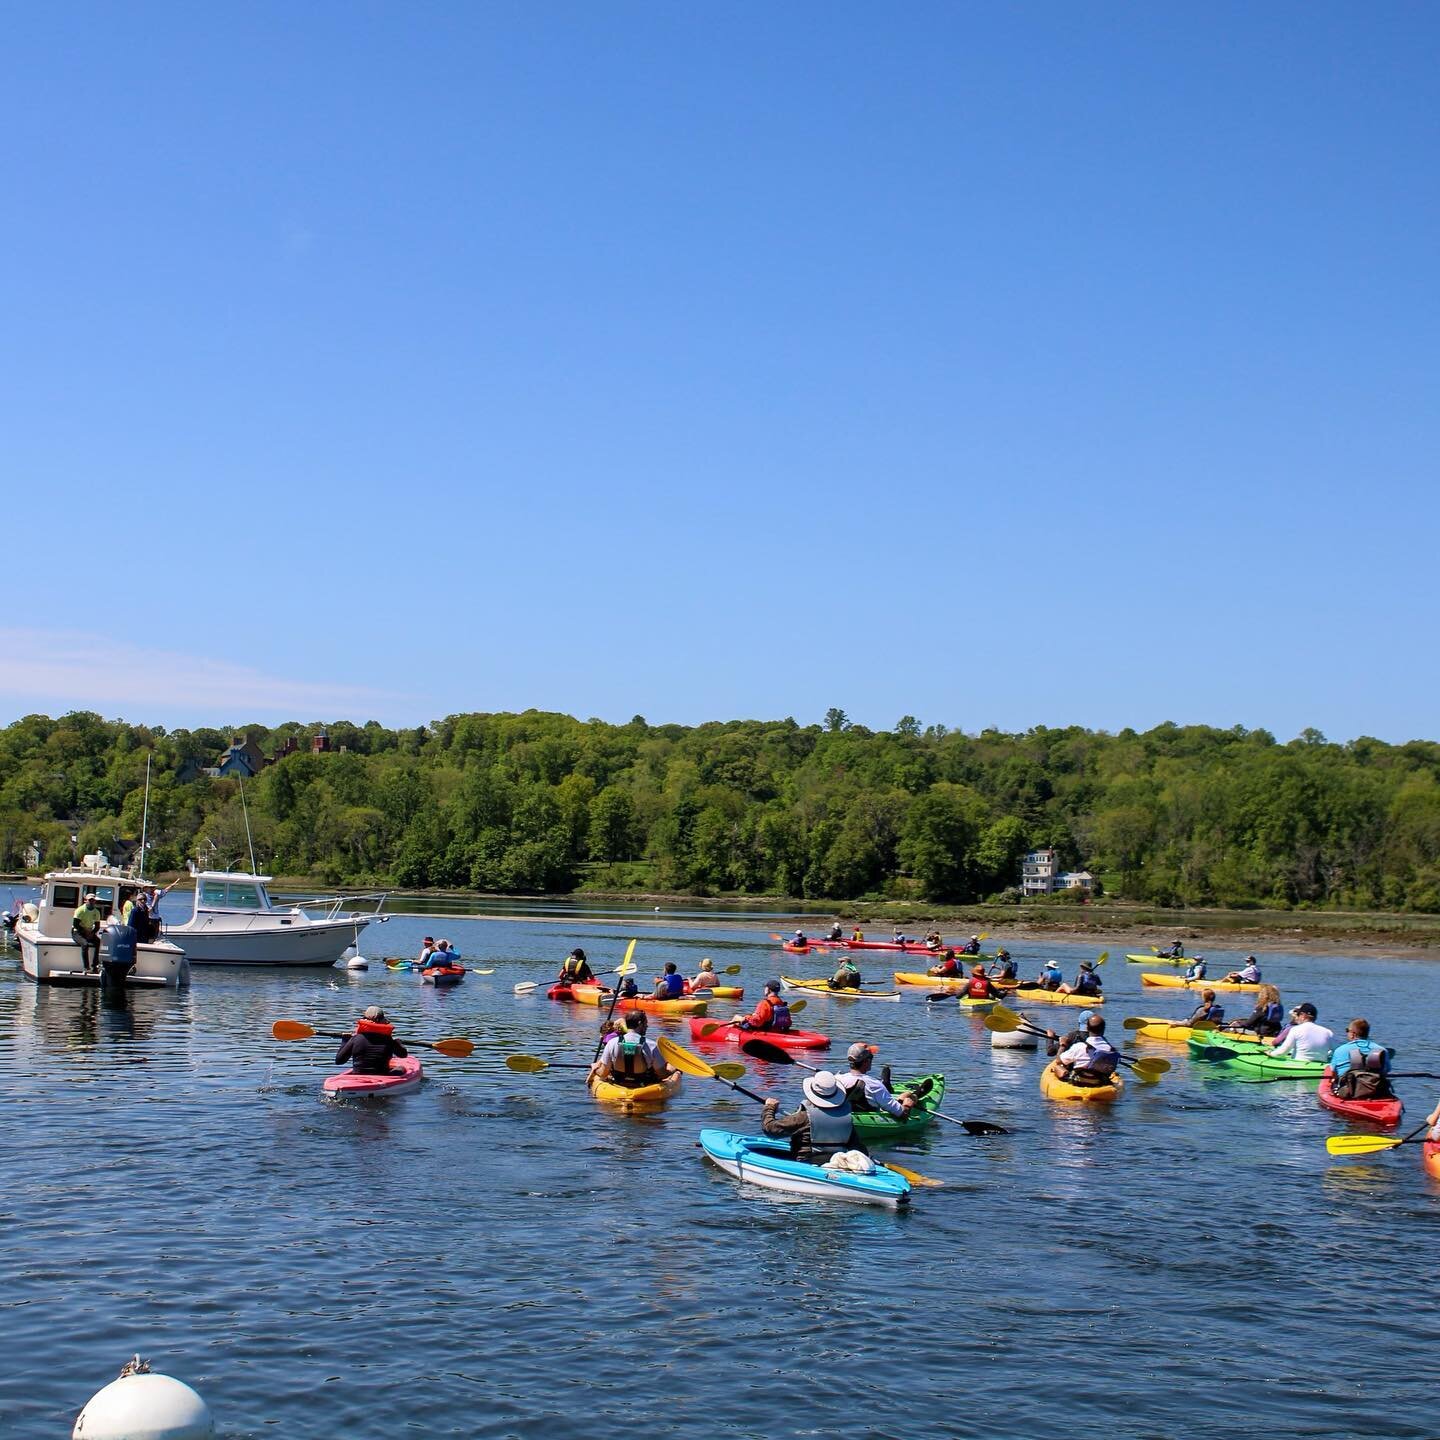 *BIG ANNOUNCEMENT*
July 17th is our second Kayak Conservation Cruise of the year with @friendsofthebay1987! This time we are launching from The WaterFront Center dock and paddling towards Theodore Roosevelt park! You can choose to rent a kayak for us